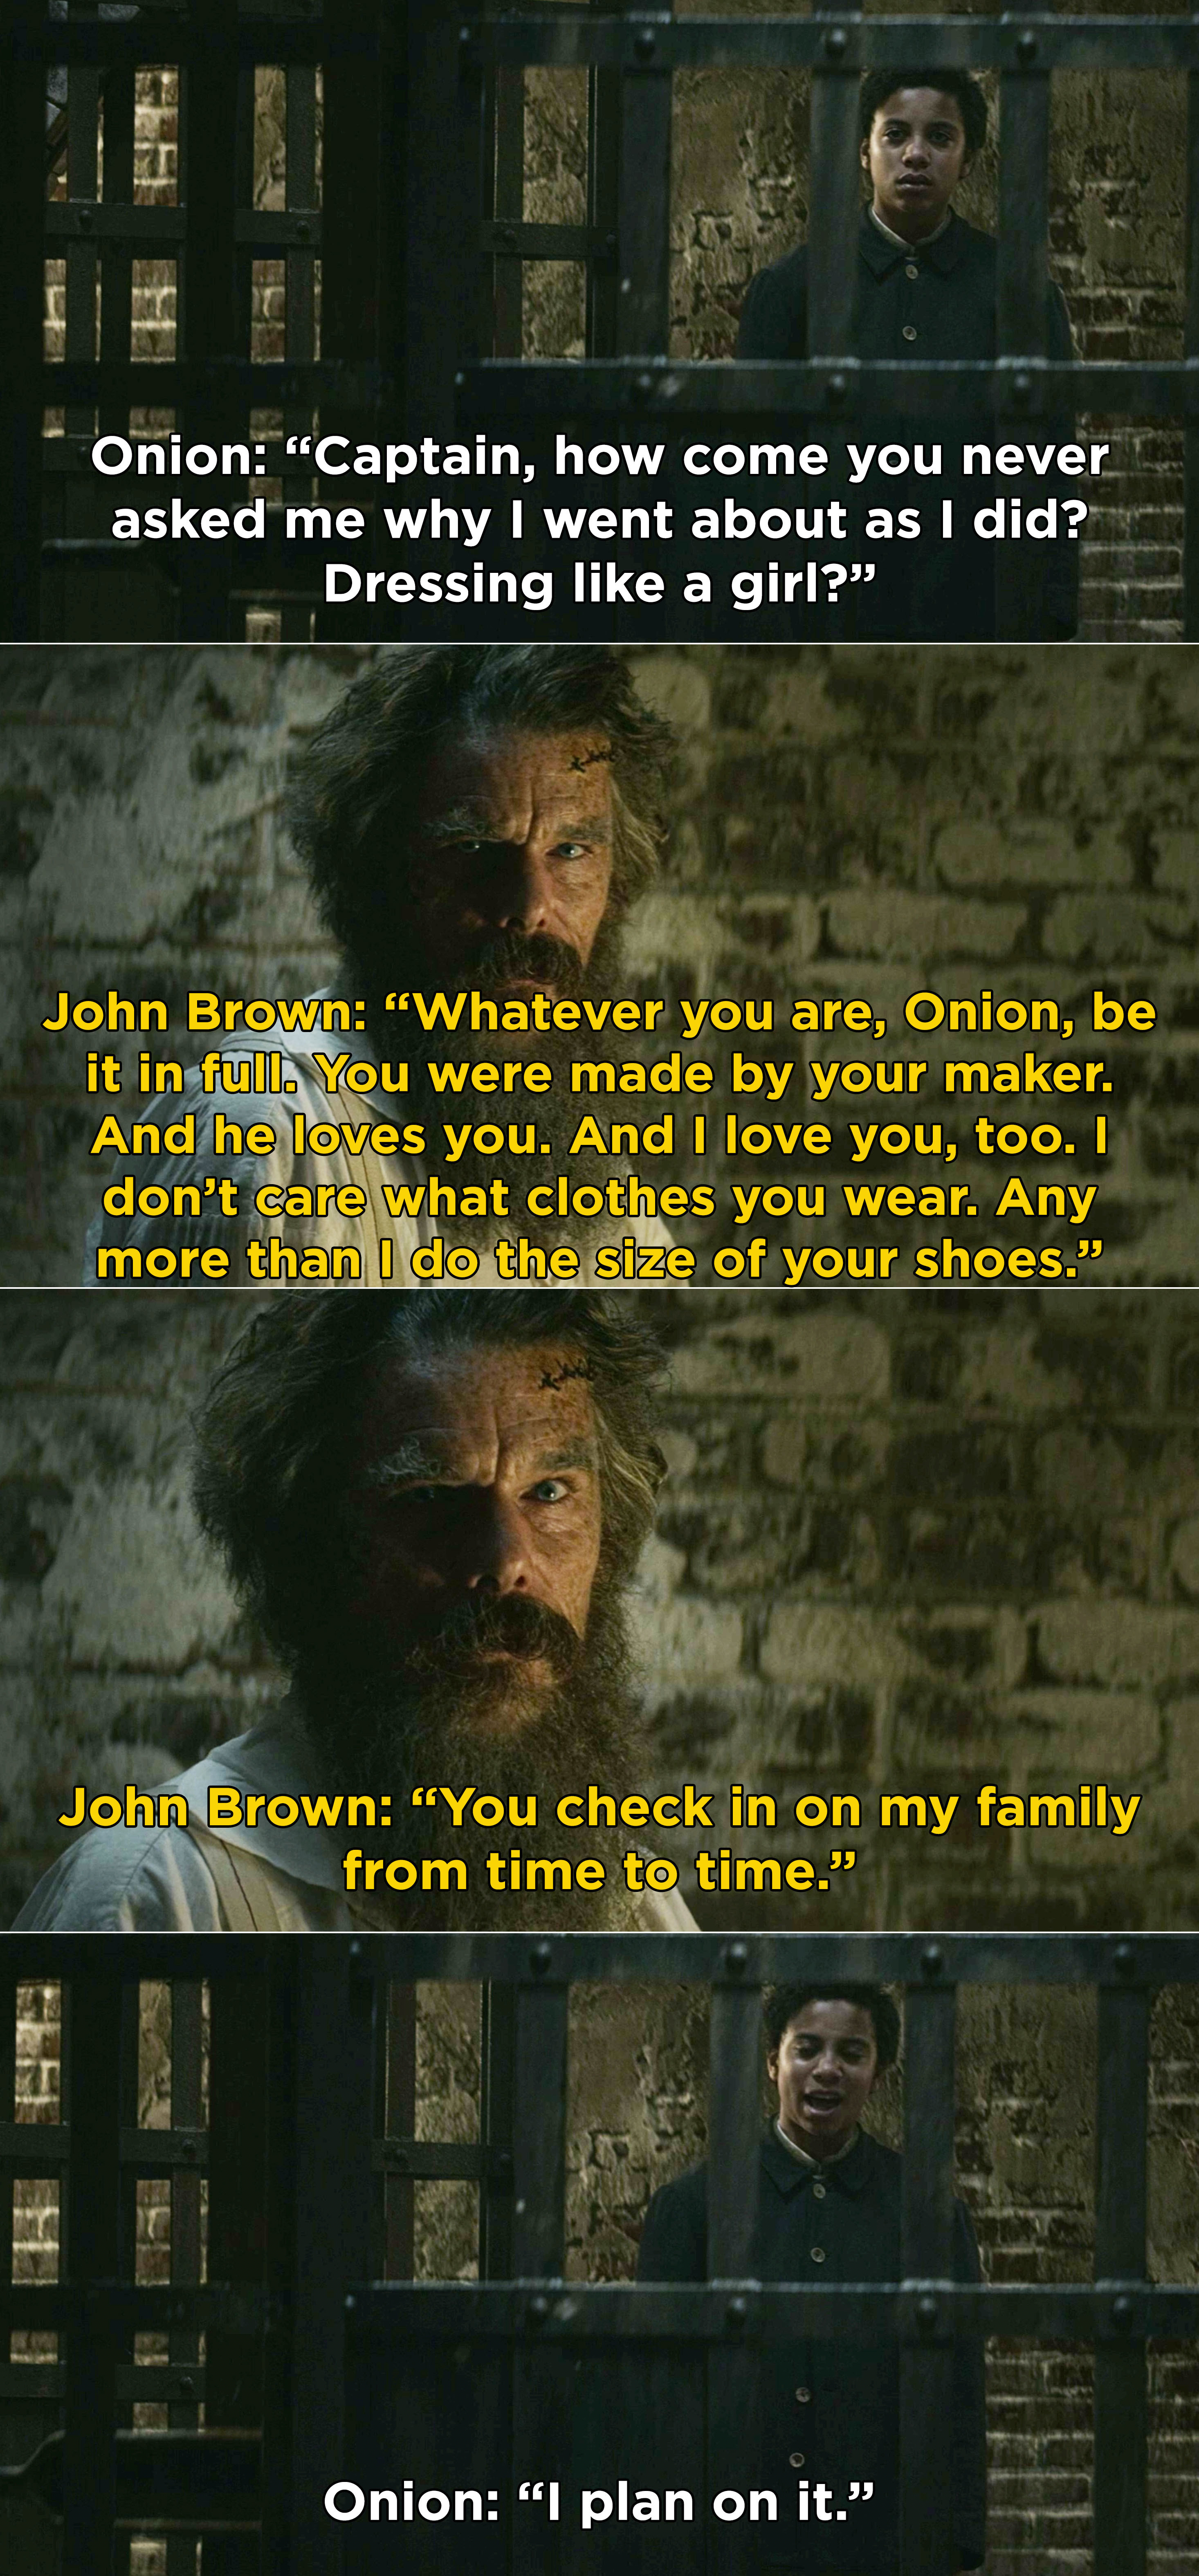 John Brown telling Onion that he didn&#x27;t care that he dressed like a girl and that he loves him. John also asking Onion to check in on his family